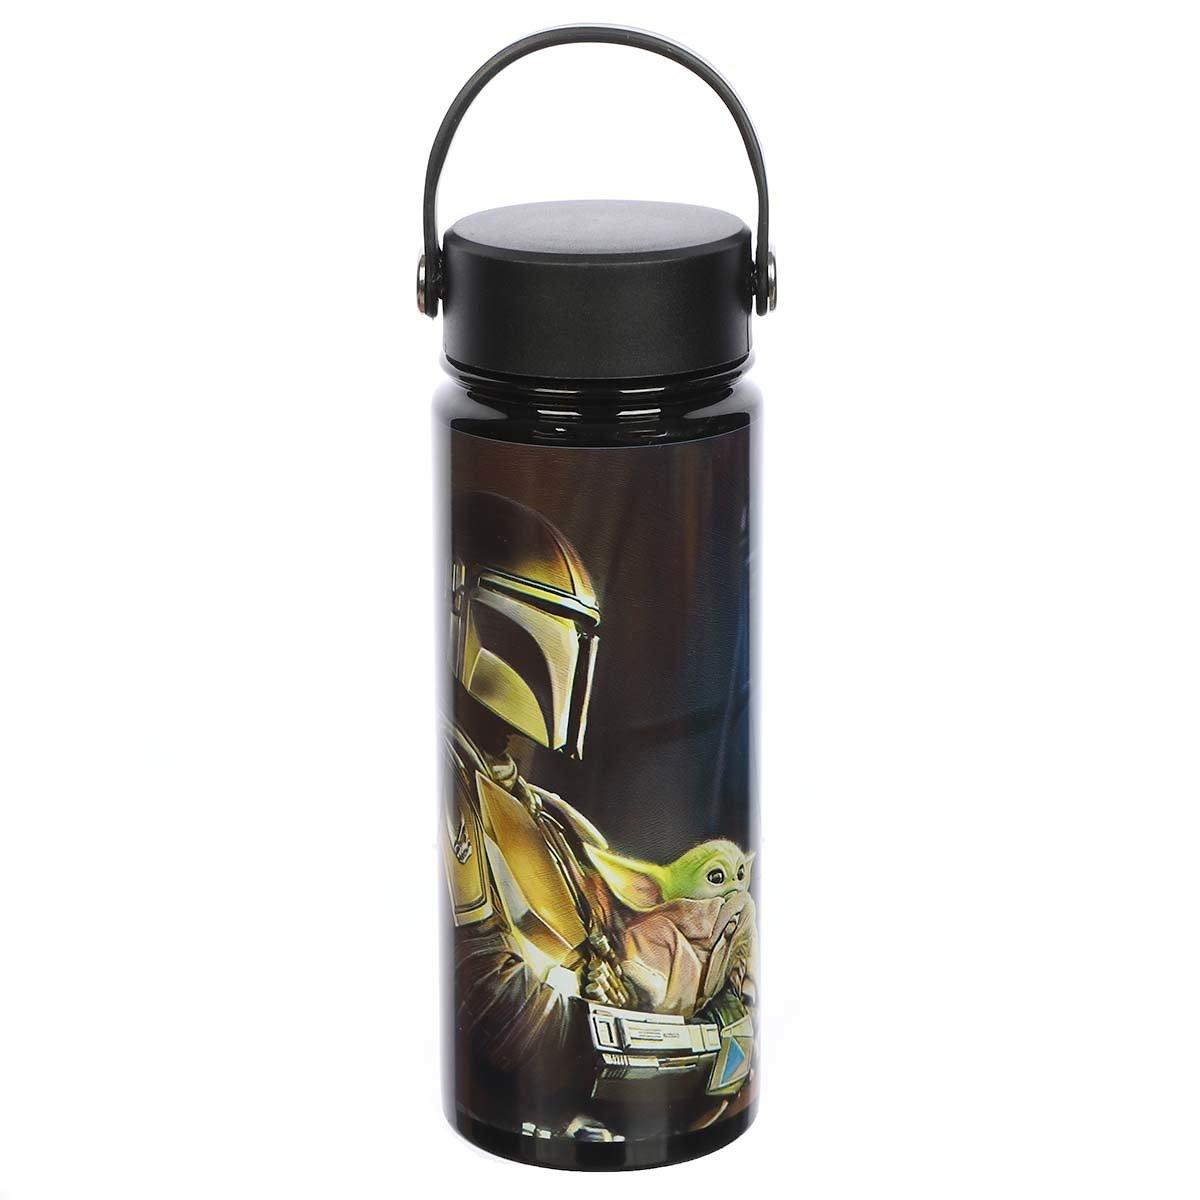 https://media.gamestop.com/i/gamestop/11178372/Star-Wars-The-Mandalorian---The-Mandalorian-and-The-Child-Stainless-Steel-Water-Bottle